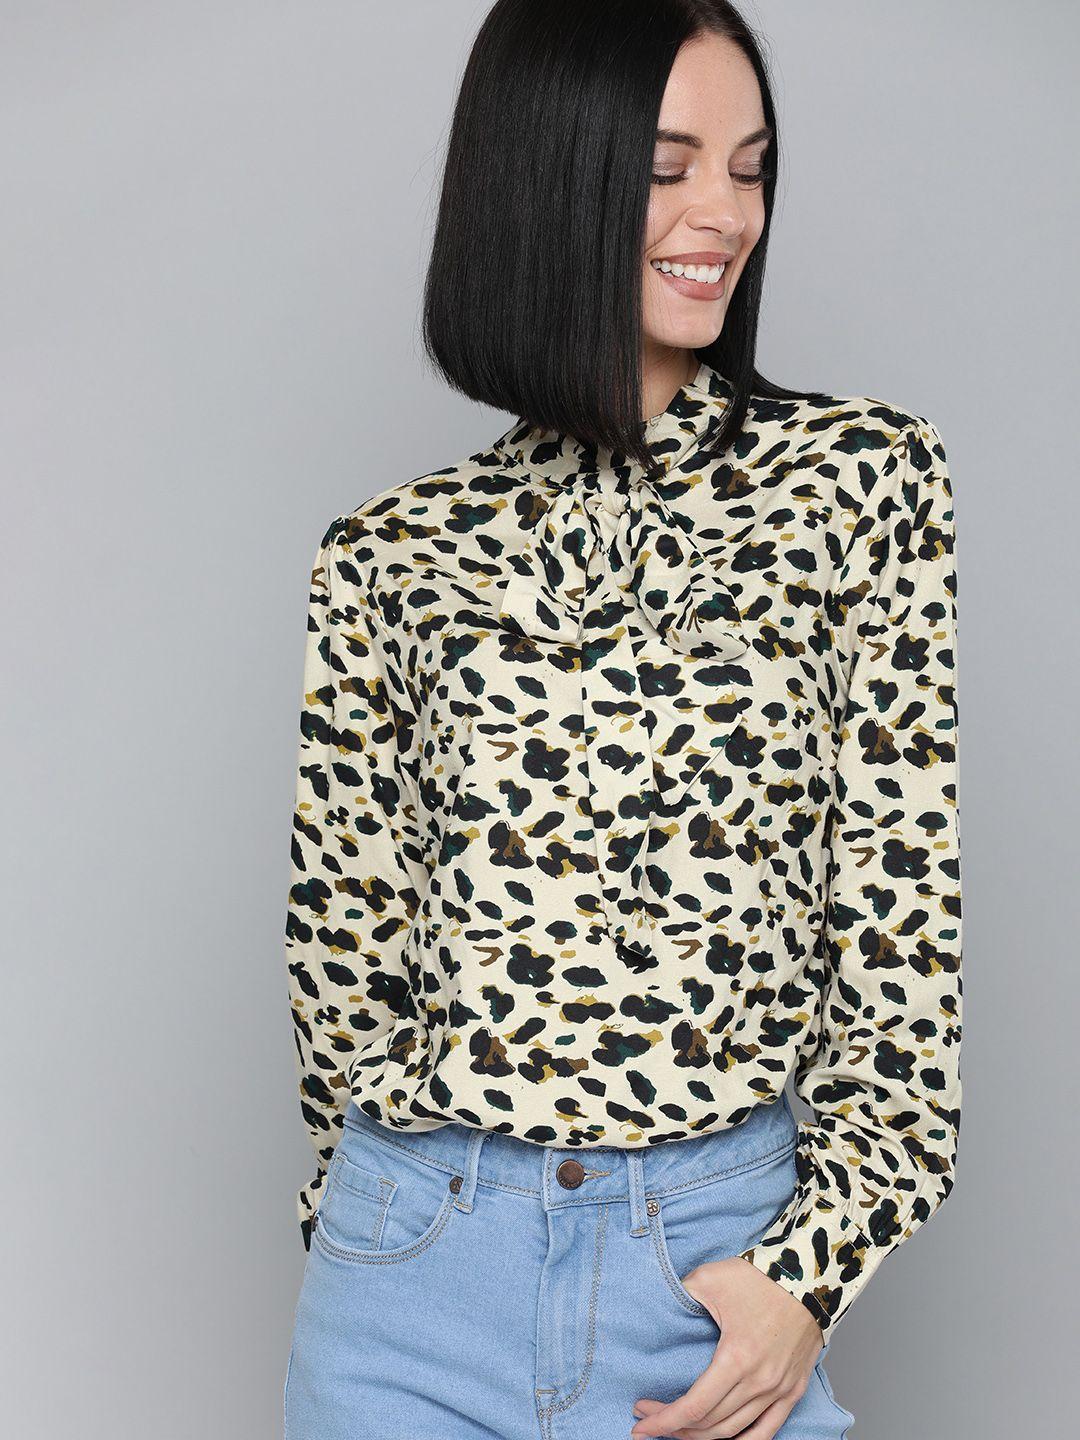 here&now women off-white & black animal printed shirt style top with tie-up neck